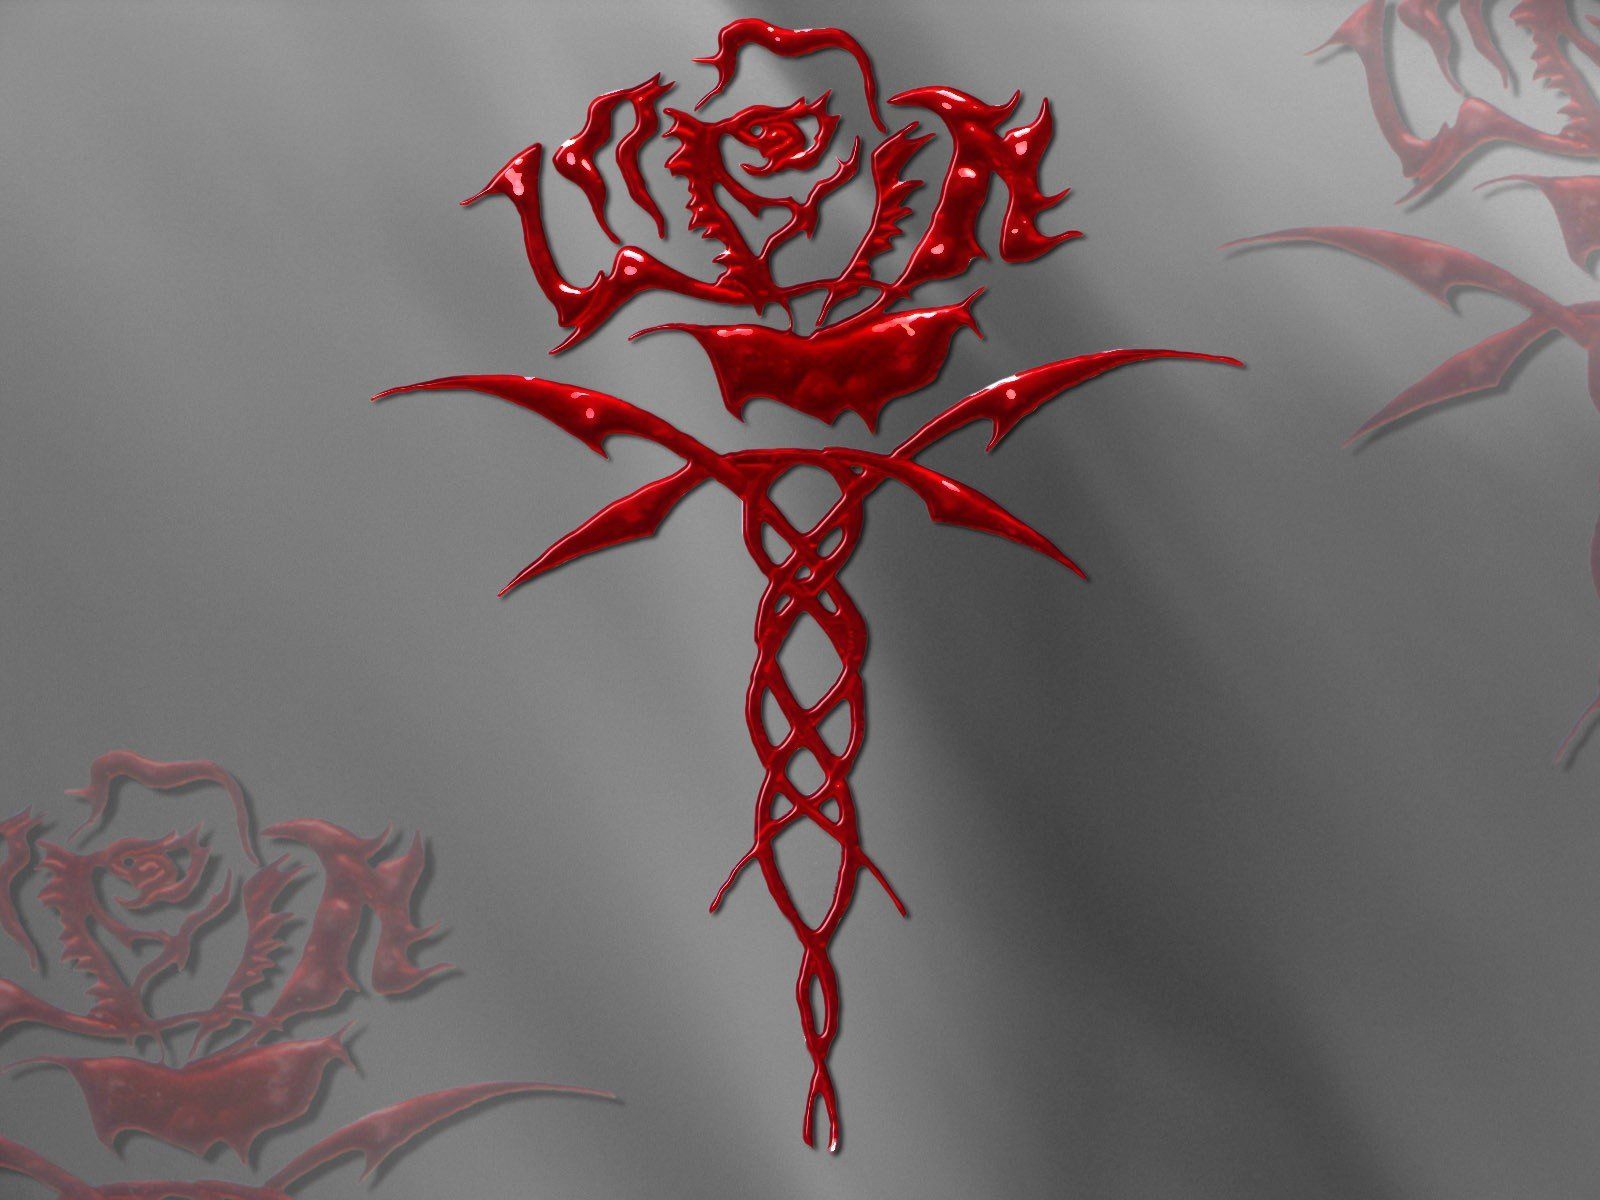 Free download Blood rose wallpapers Hd Tumblr For Walls for Mobile.